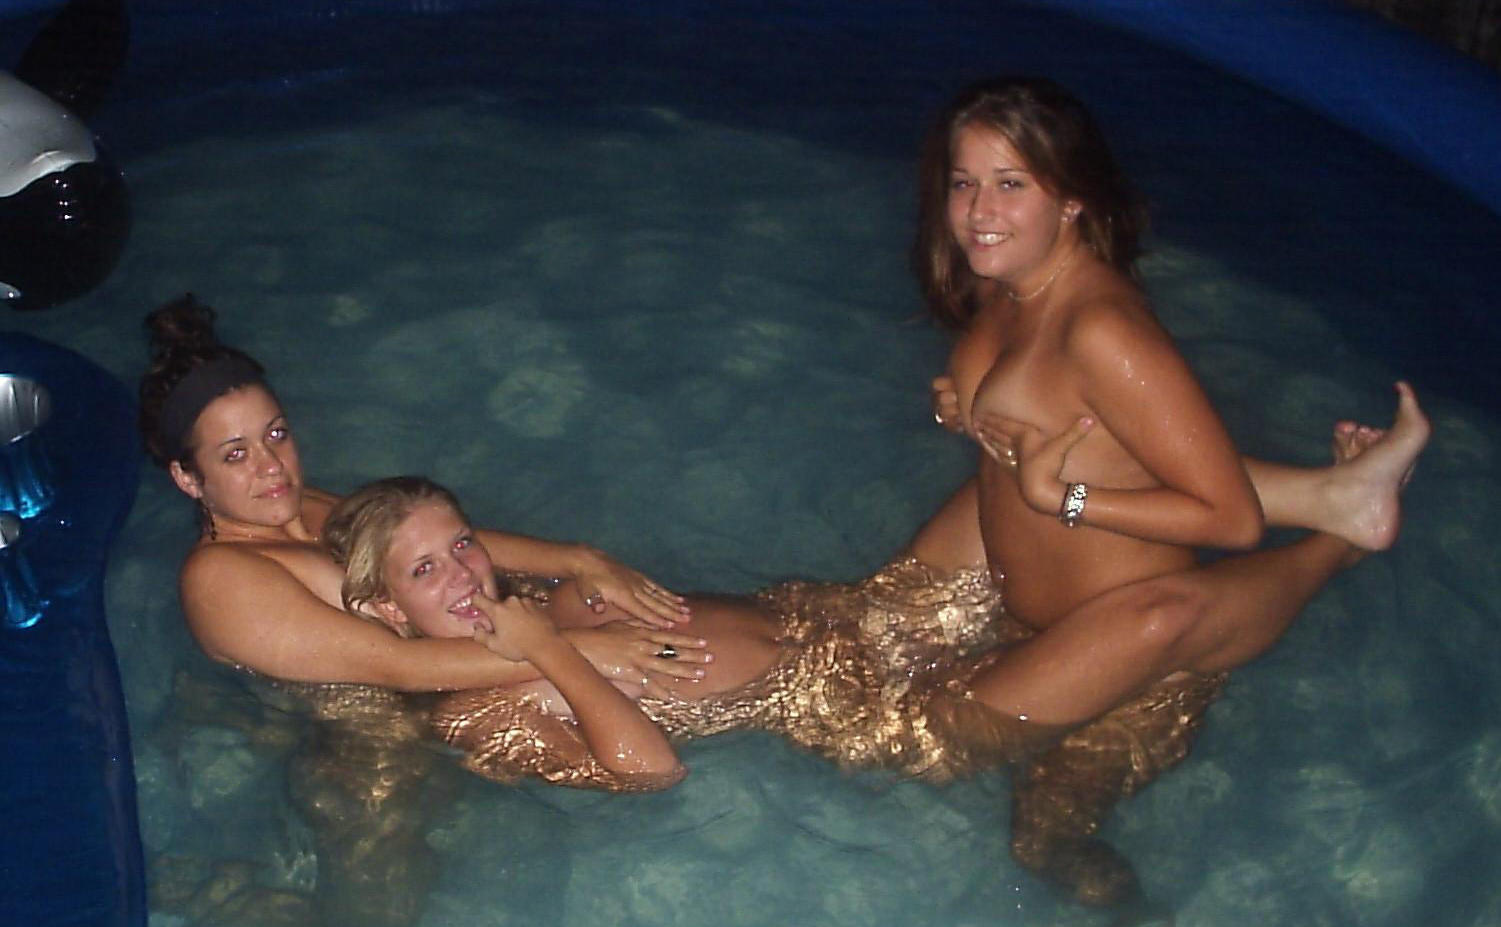 Skinny dipping dare teen makes with